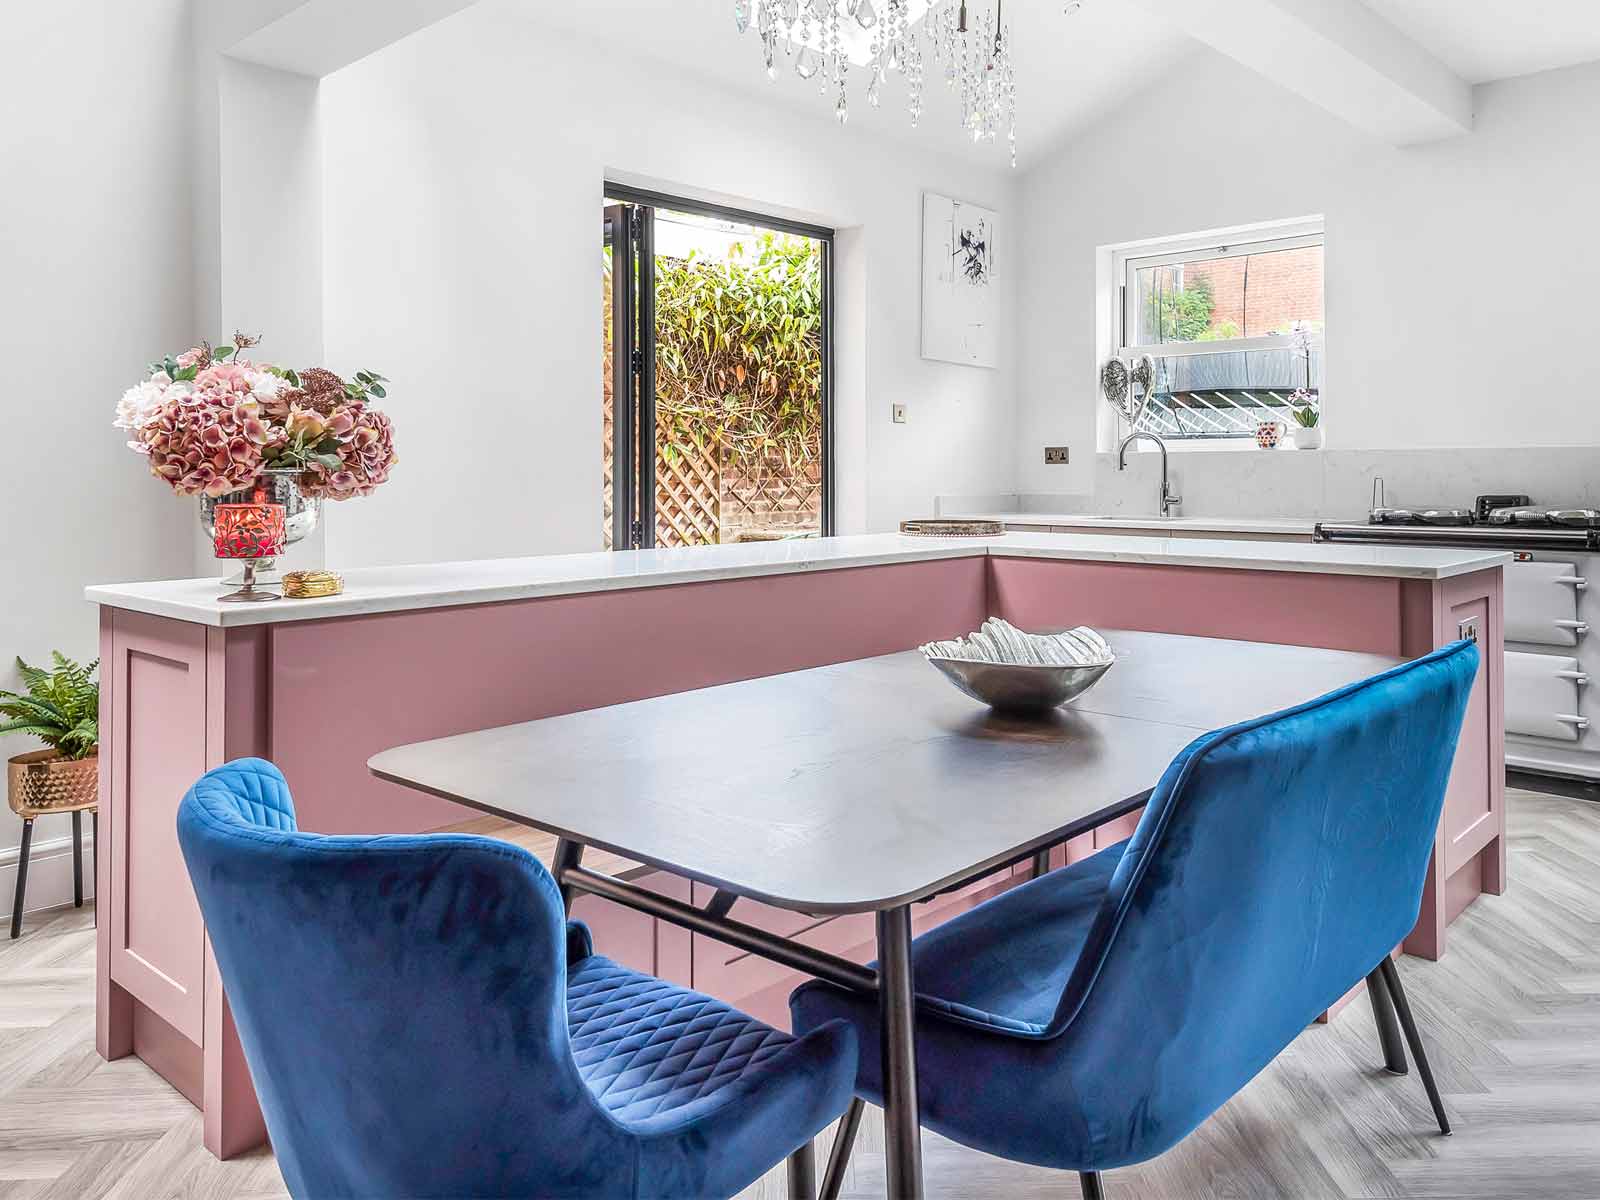 A pink kitchen range with Mexican kitsch flowers and blue seating